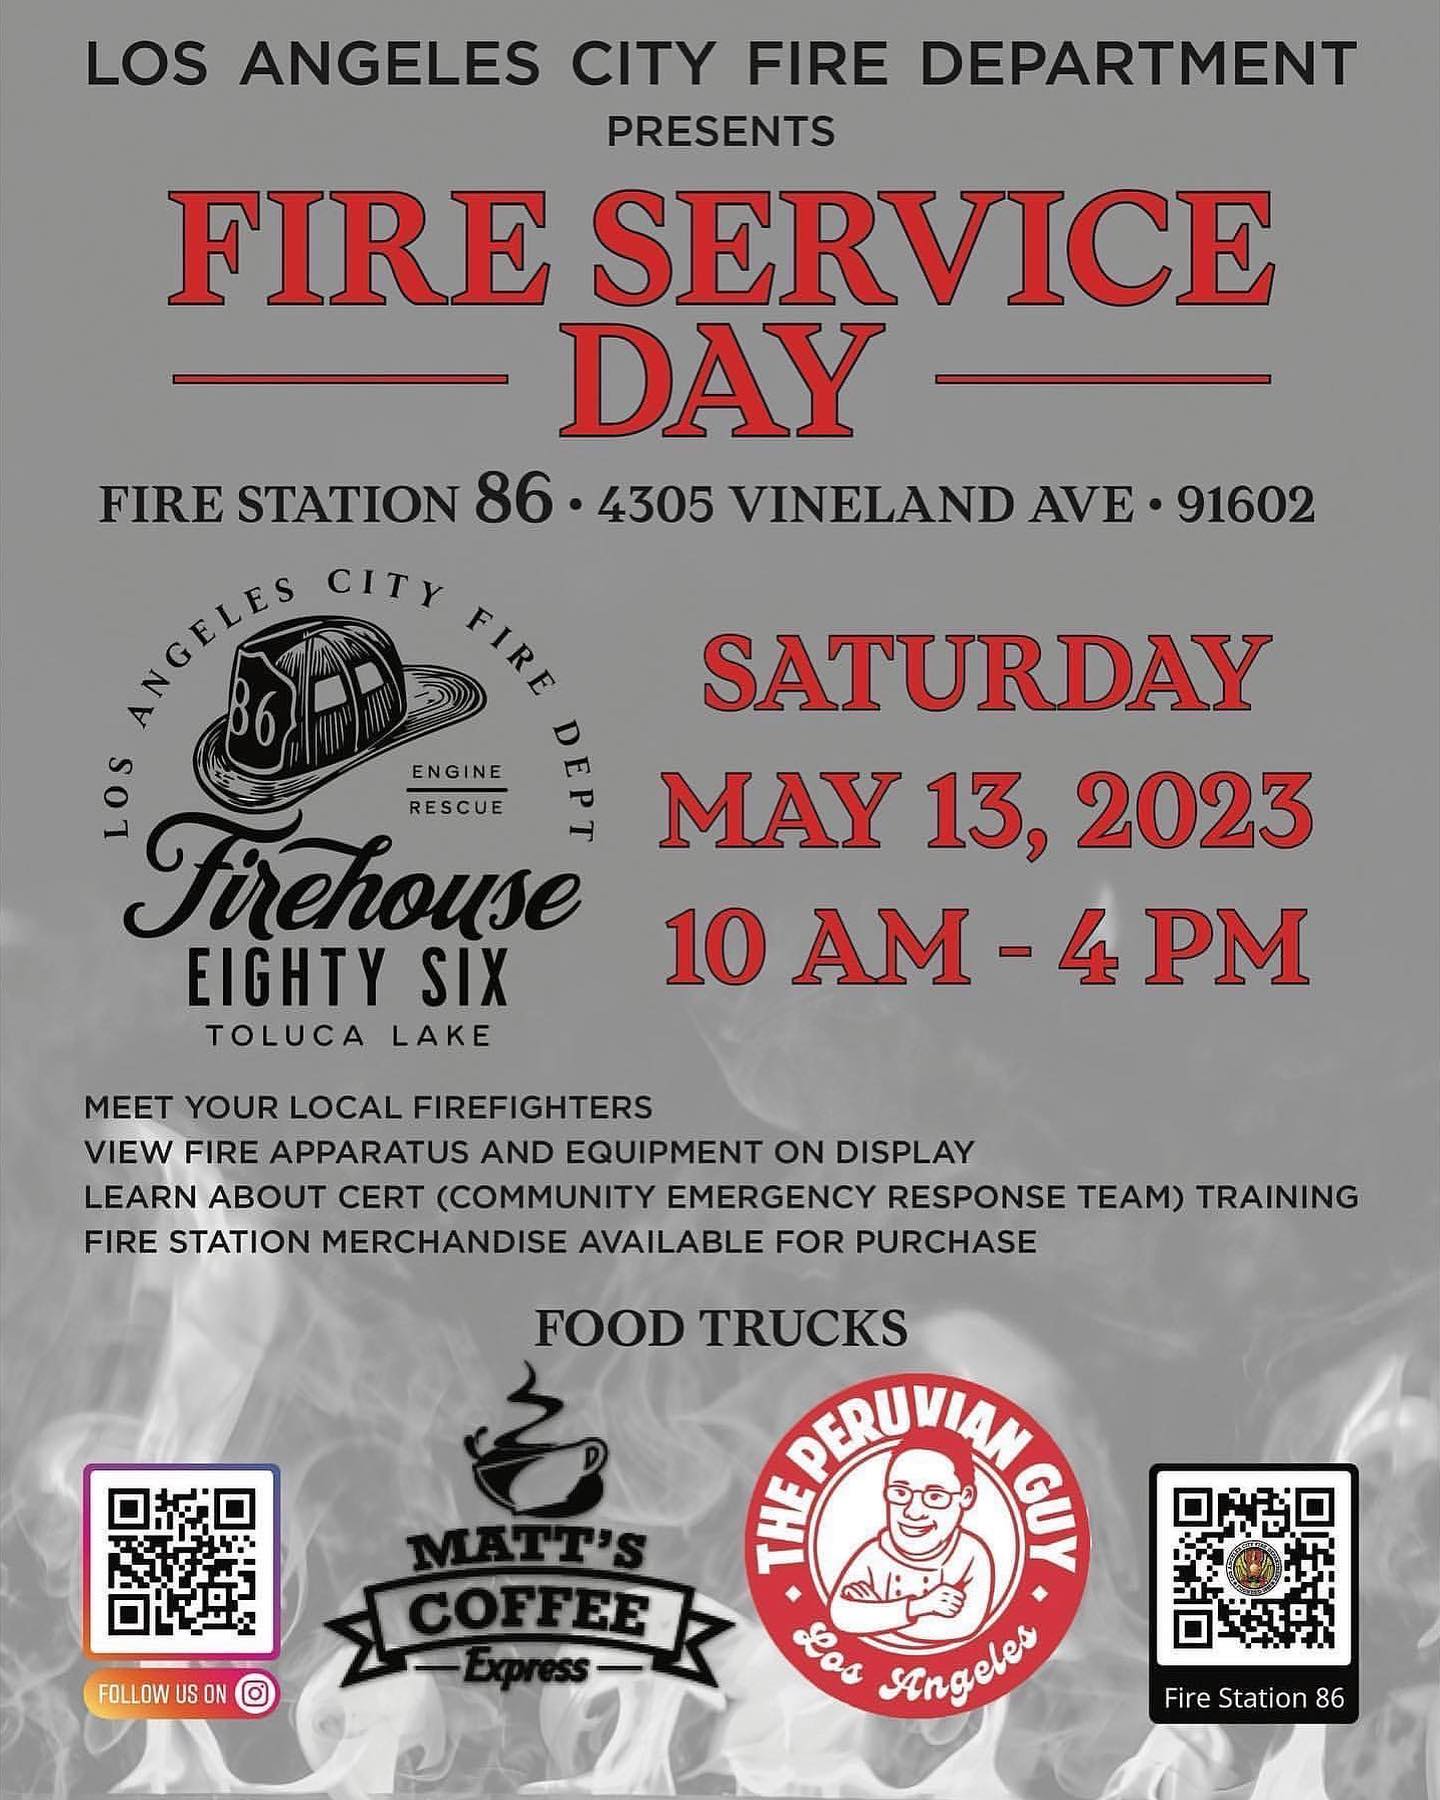 Fire Service Day Flyer for Fire Station 86